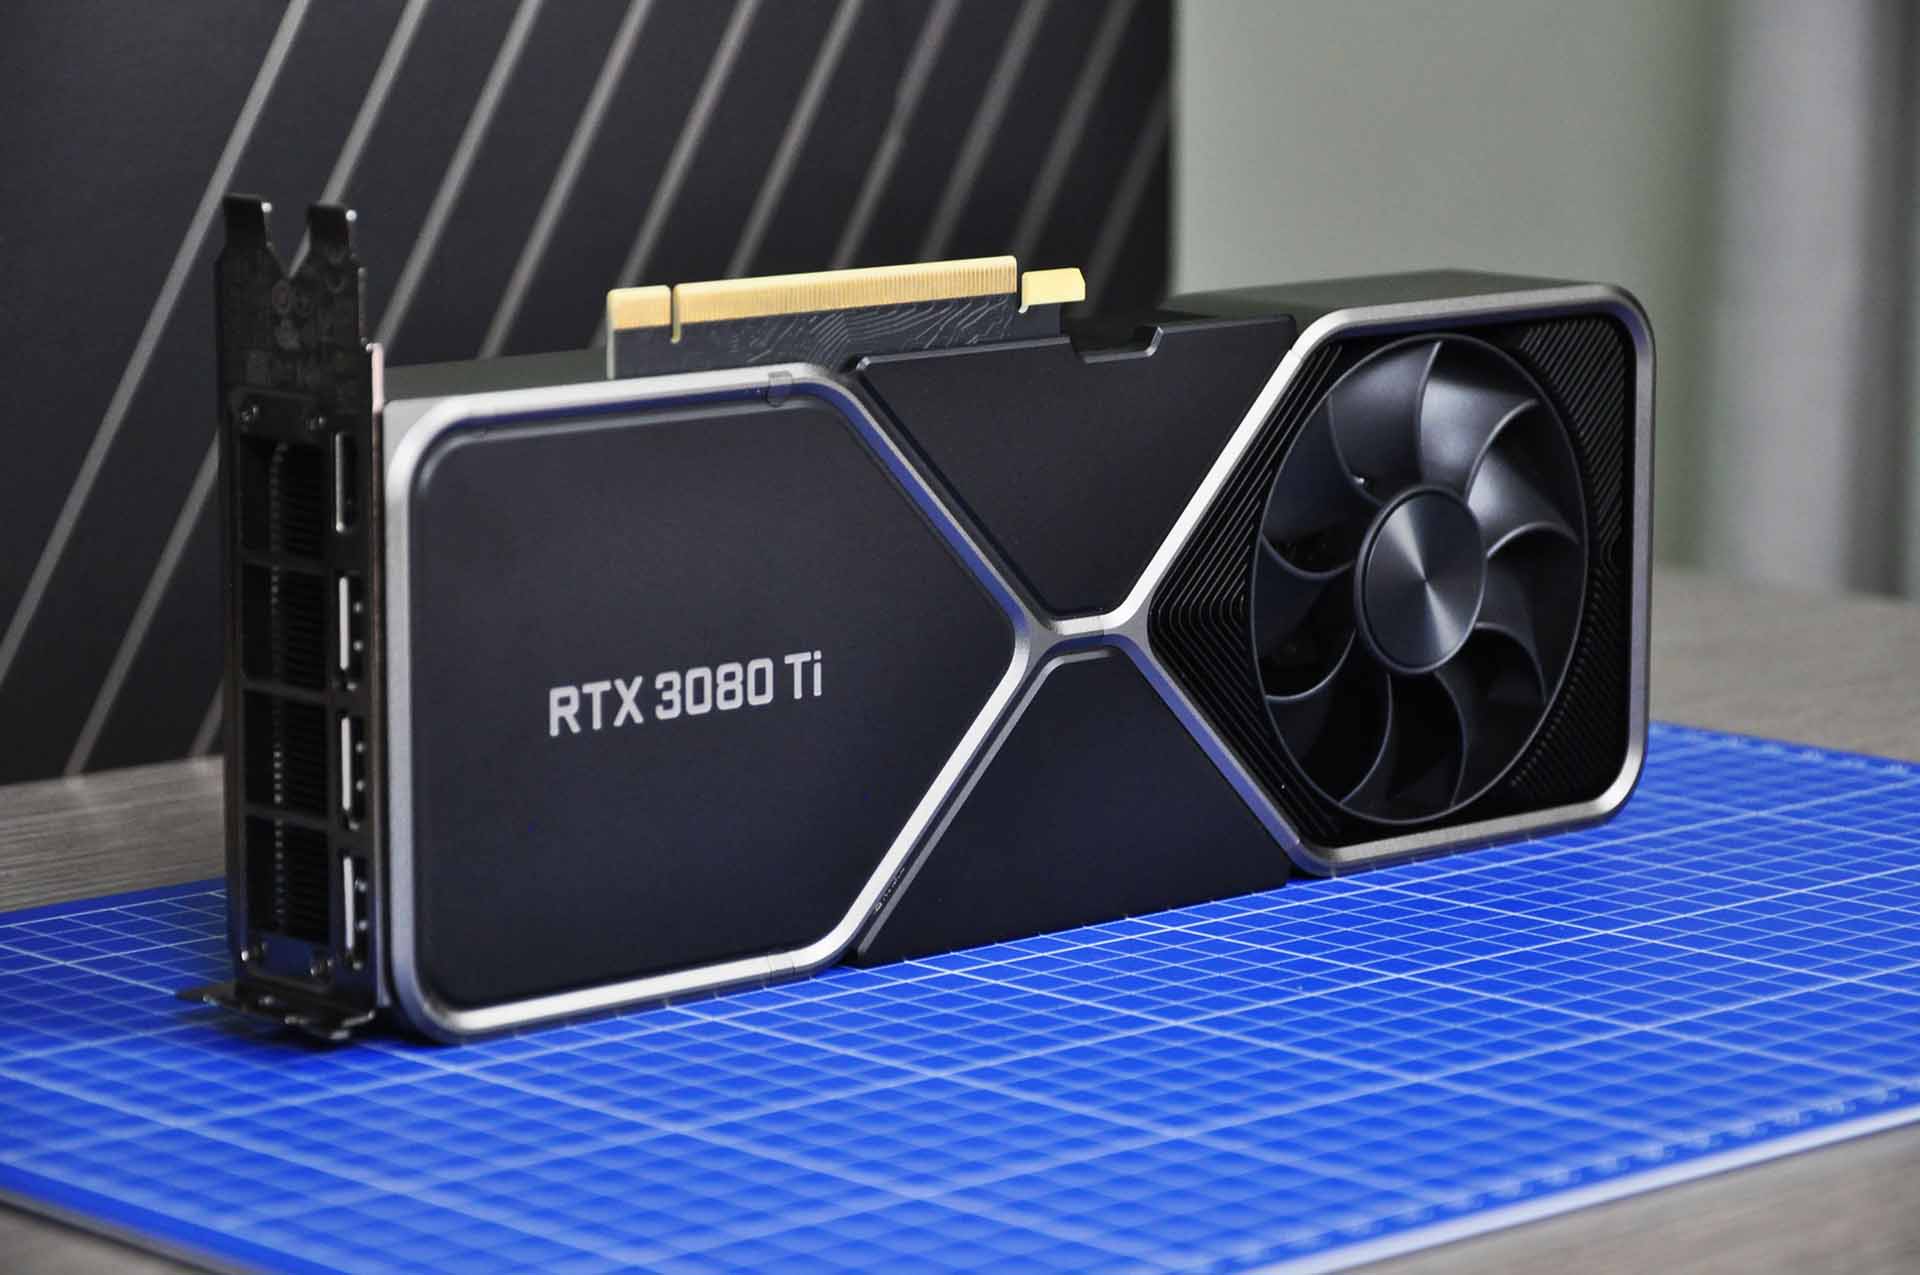 Some RTX 3080 Ti allow to install the BIOS of the RTX 3090, reaching 110MH / s in Ethereum mining